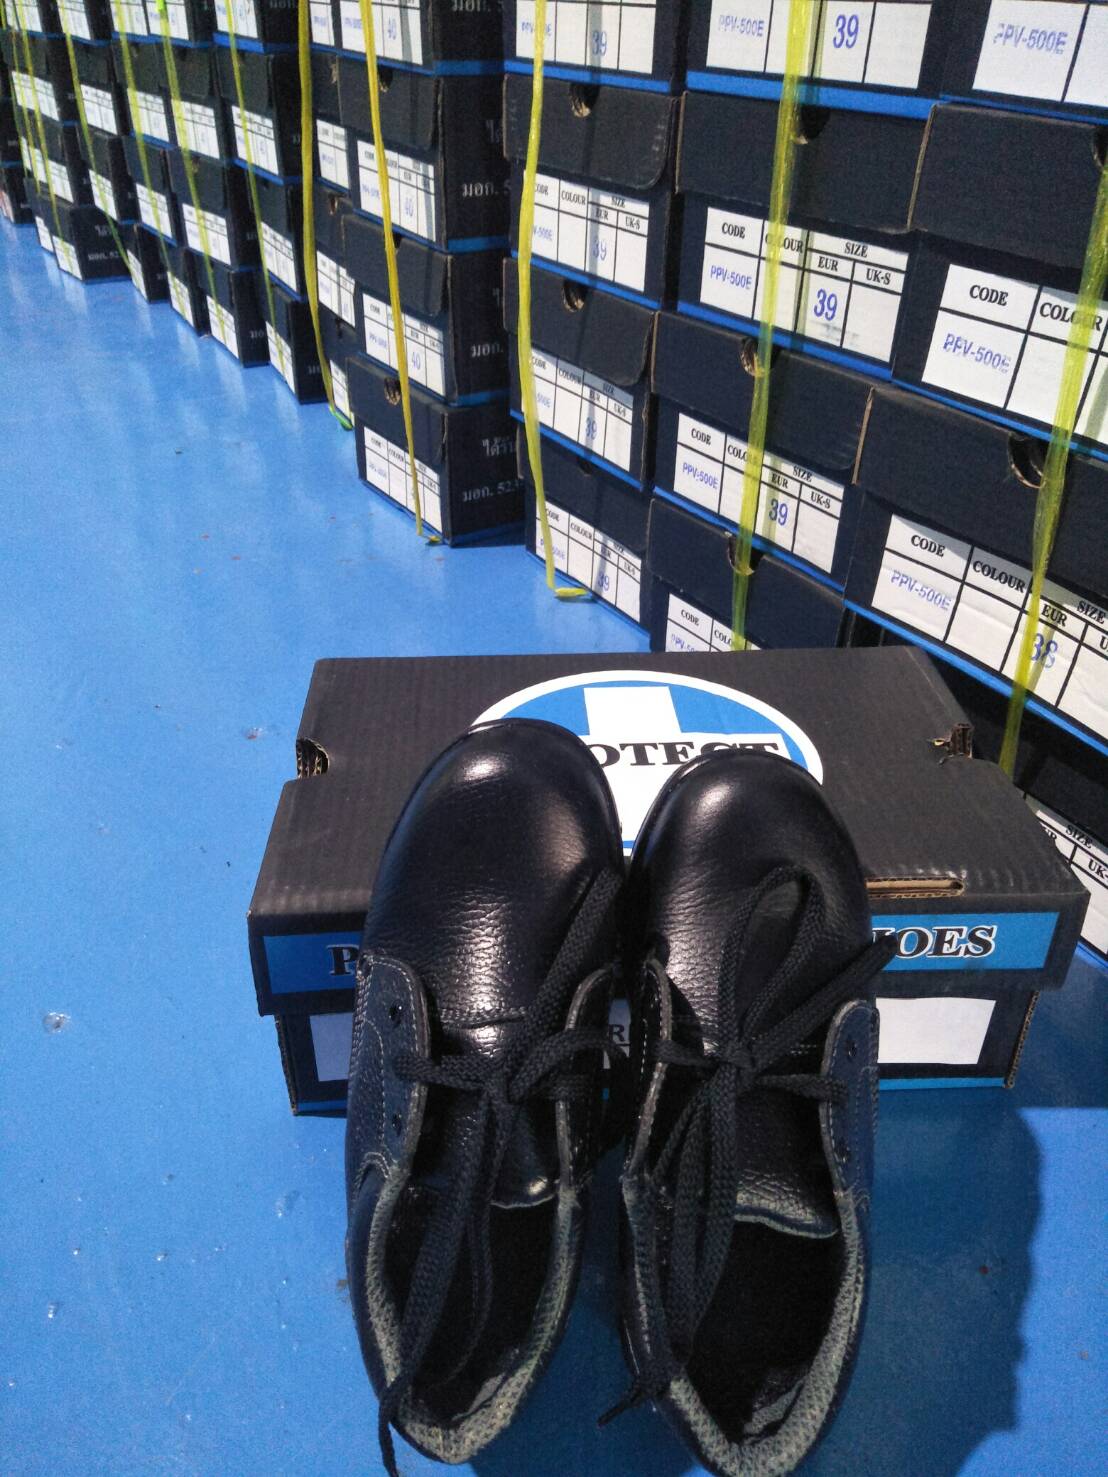 Protect safety shoes V-02e รองเท้าเซฟตี้